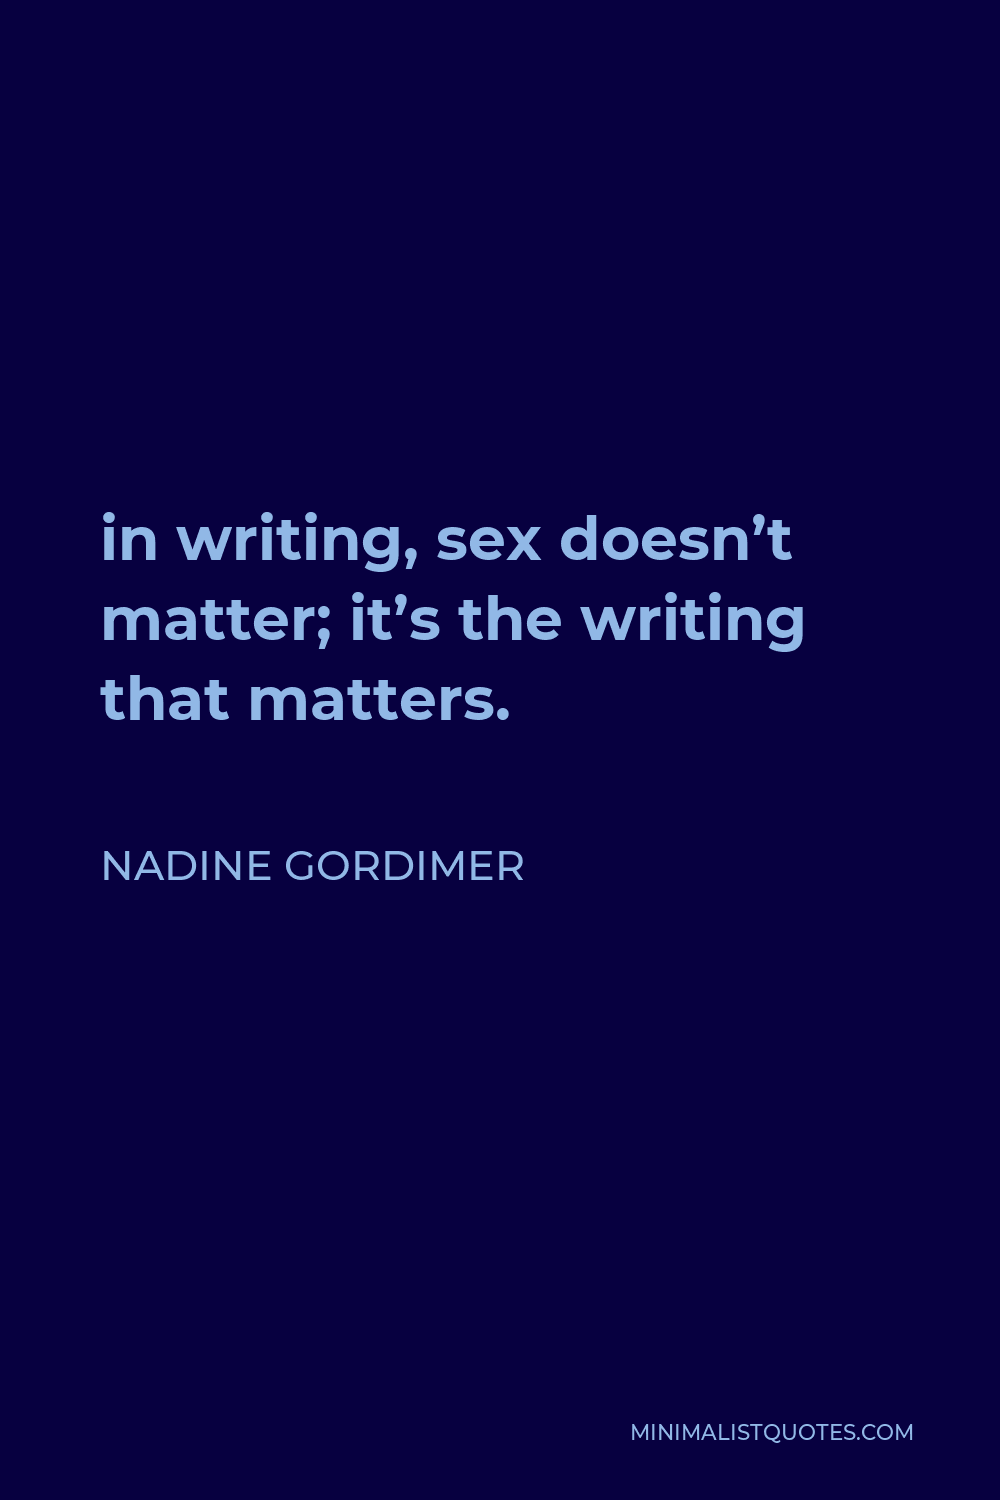 Nadine Gordimer Quote In Writing Sex Doesnt Matter Its The Writing That Matters 4359